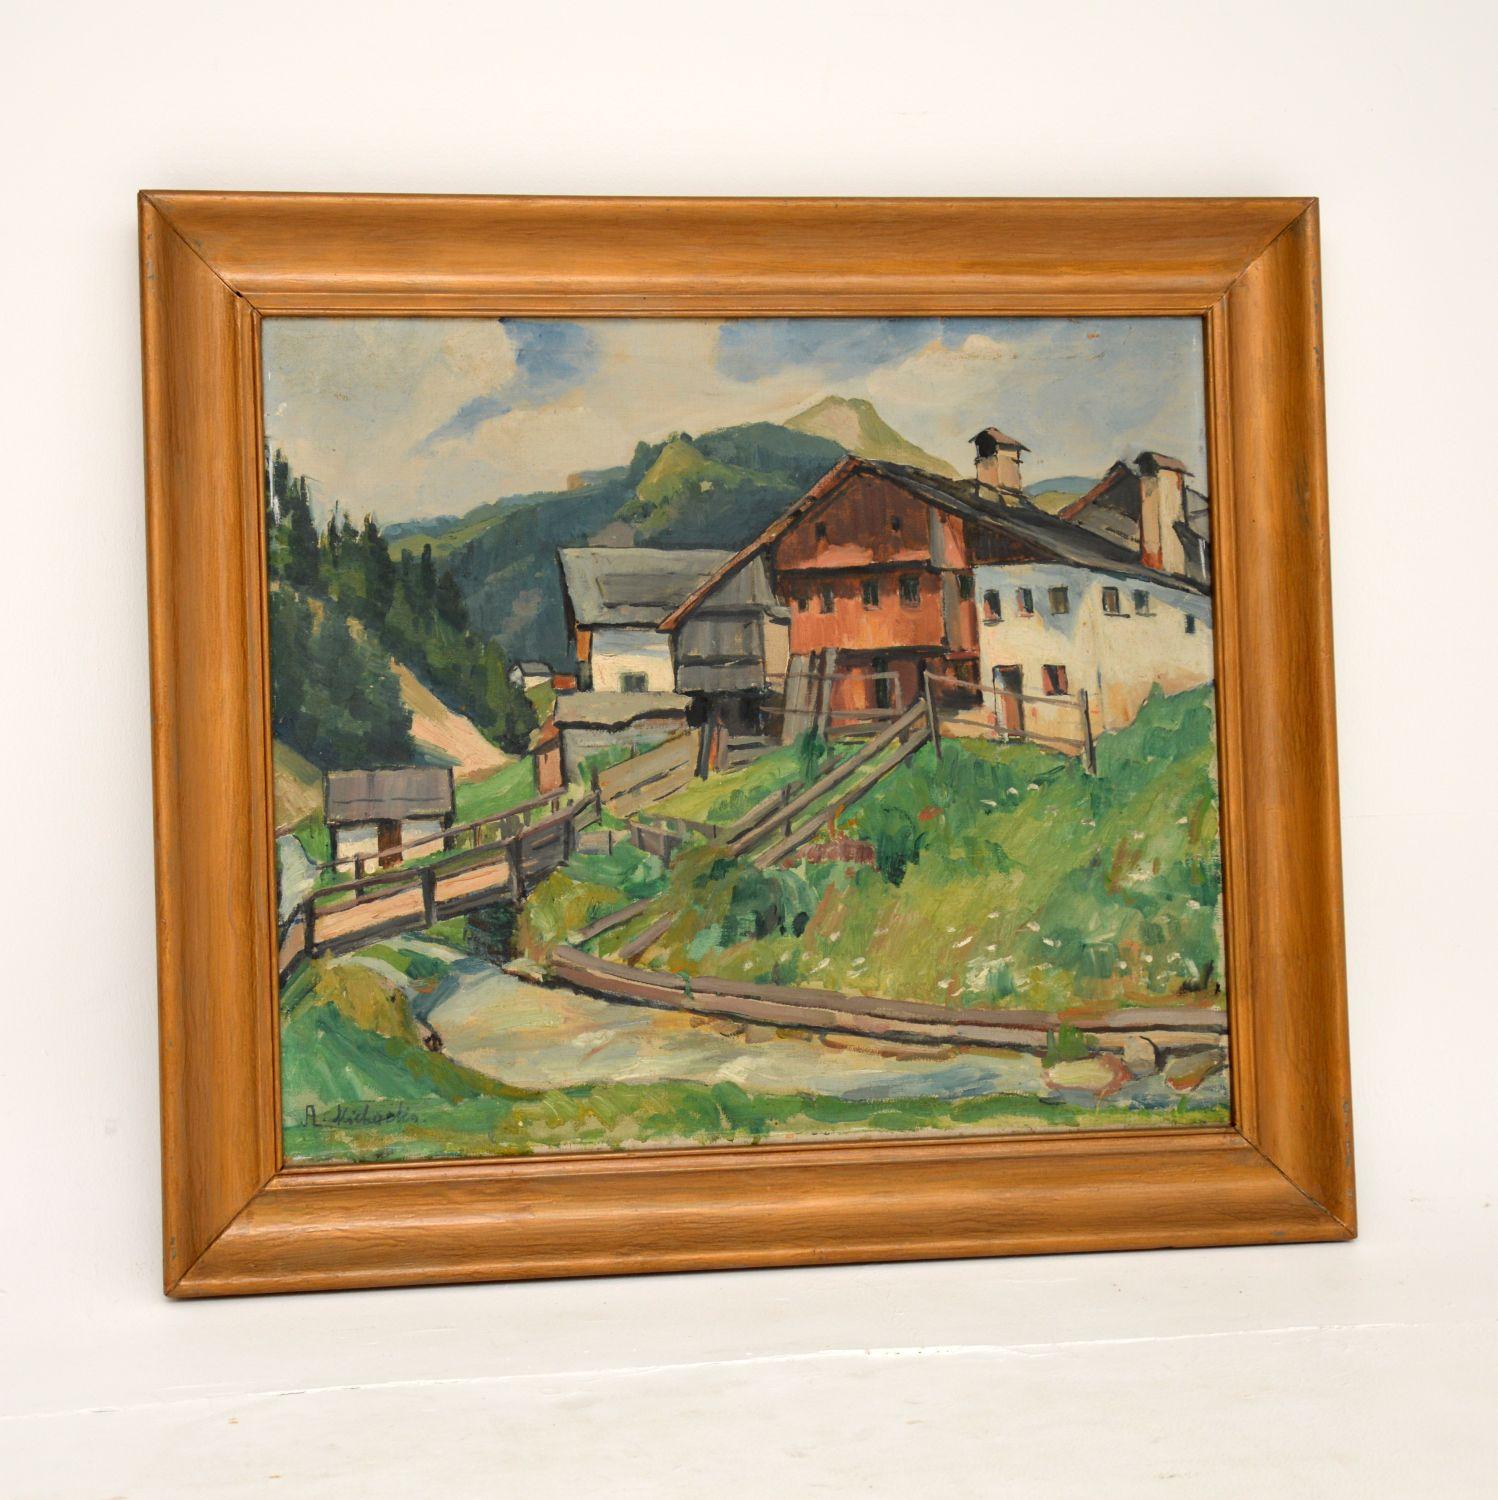 A beautiful and interesting original antique oil painting signed by the artist A. Michaelis. This is dated from 1937, it is in the impressionist manner.

It is beautifully executed and depicts a lovely country side mountain scene.

The condition